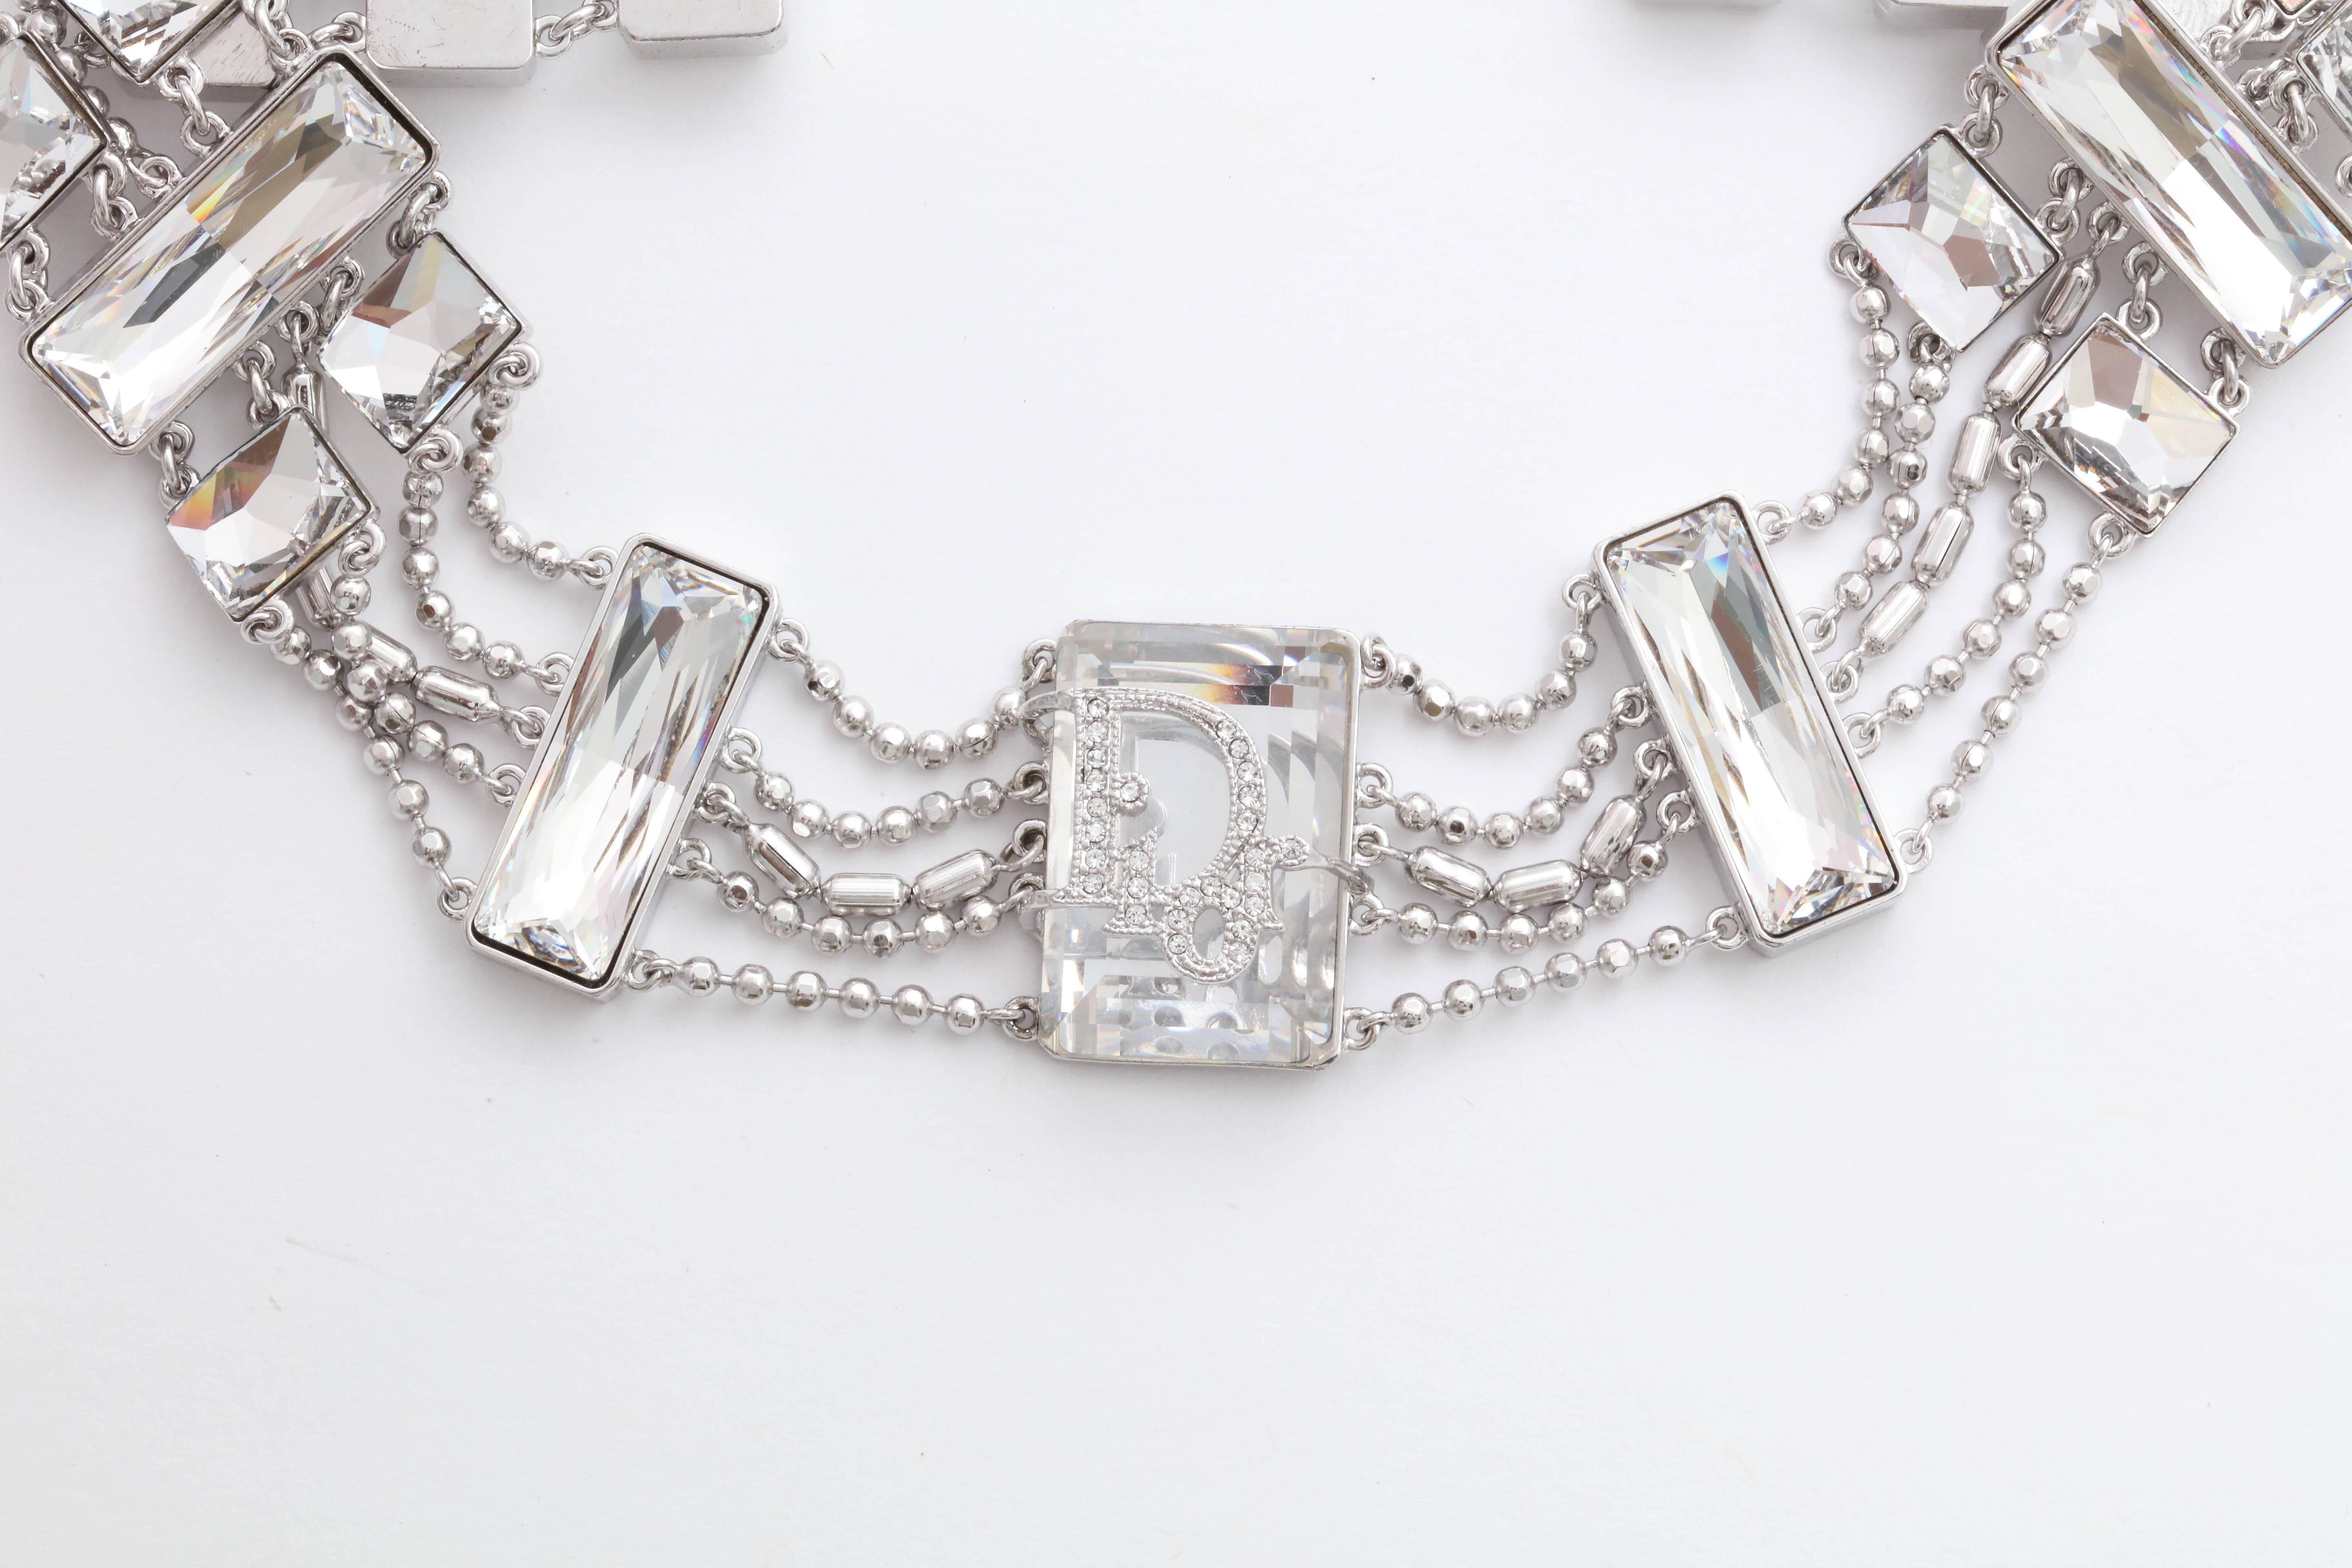 Extremely rare, beautiful Christian Dior choker with logo details on the crystal.
Color is clear and silver.